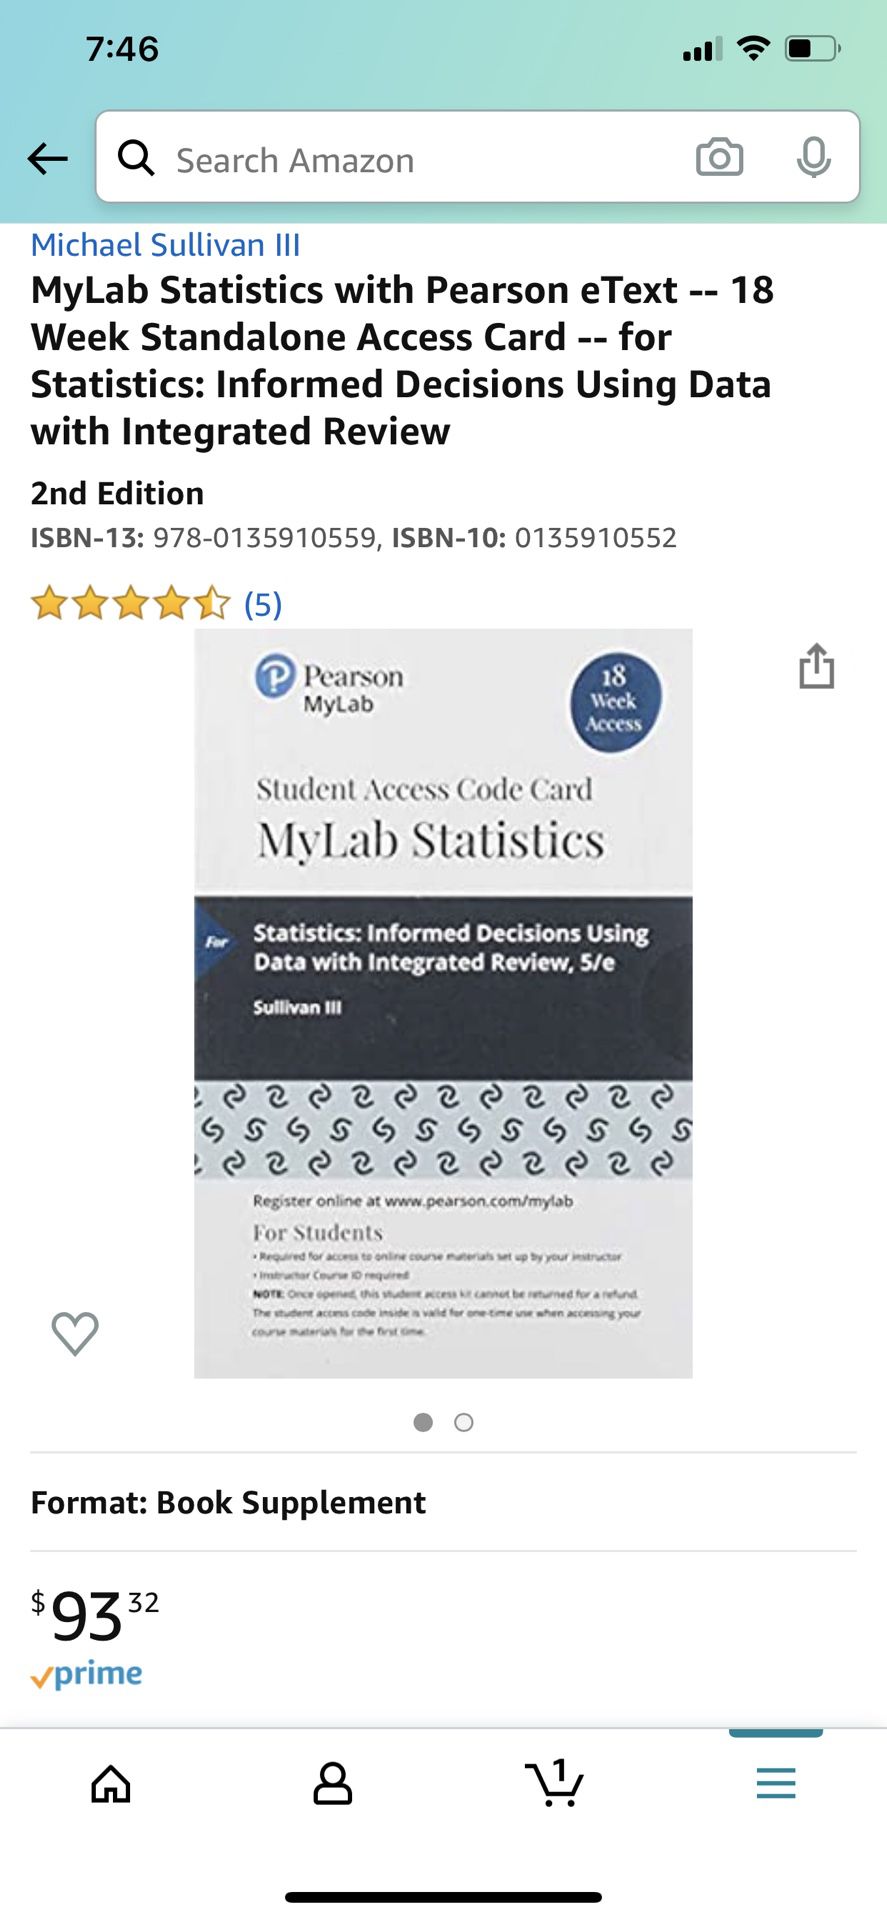 My Lab Statistics with Pearson eText